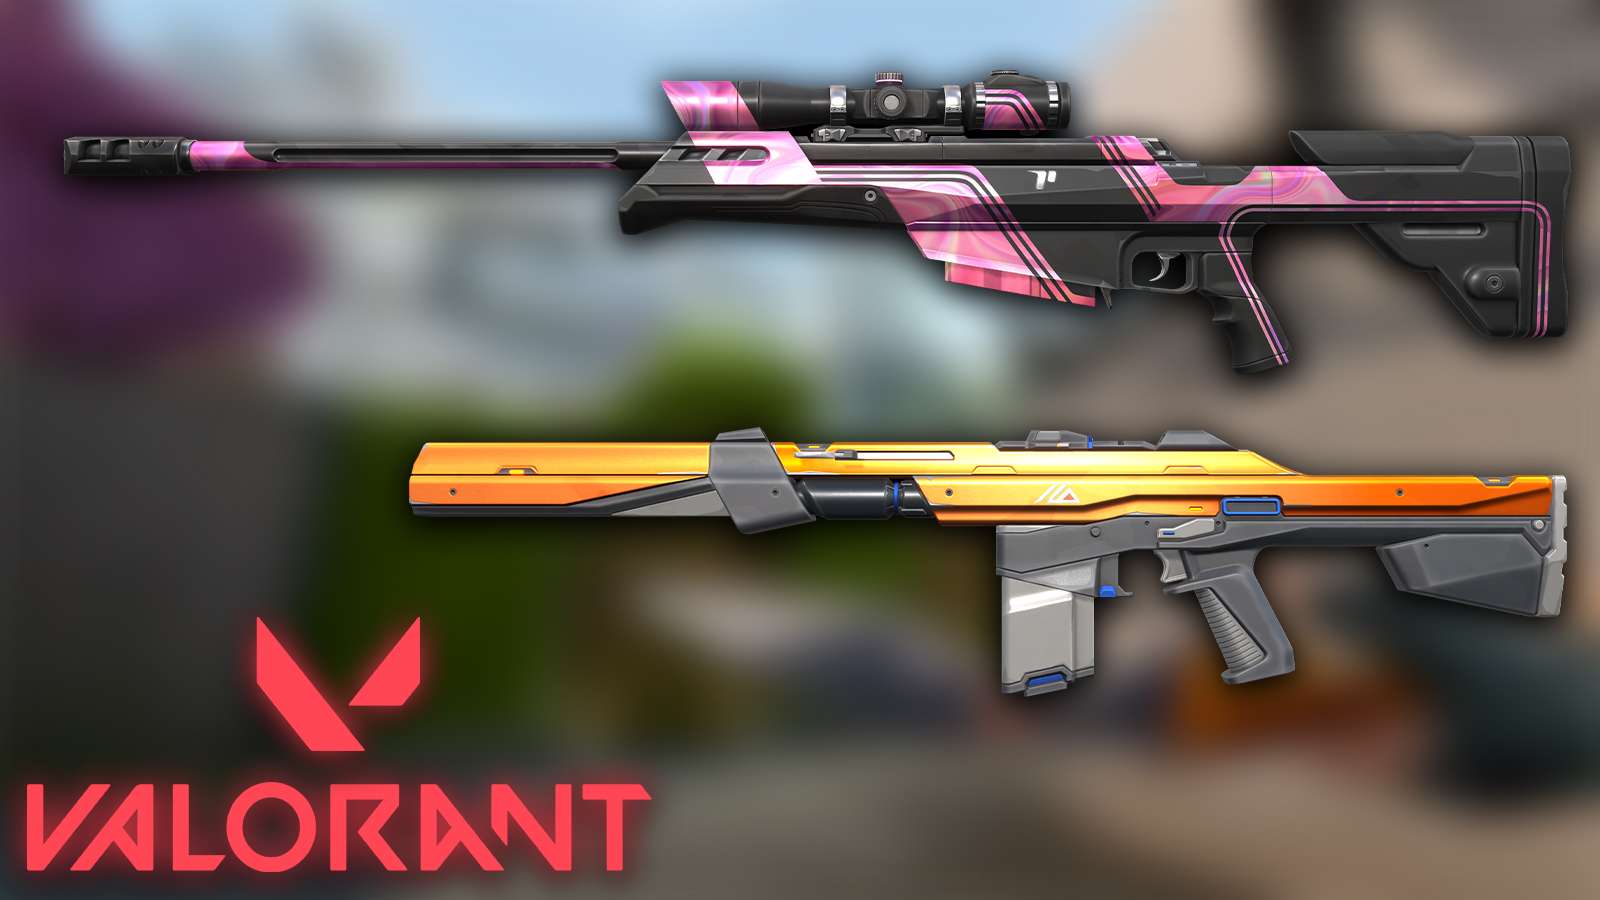 Some skins from Valorant Episode 7 Act 1 battlepass